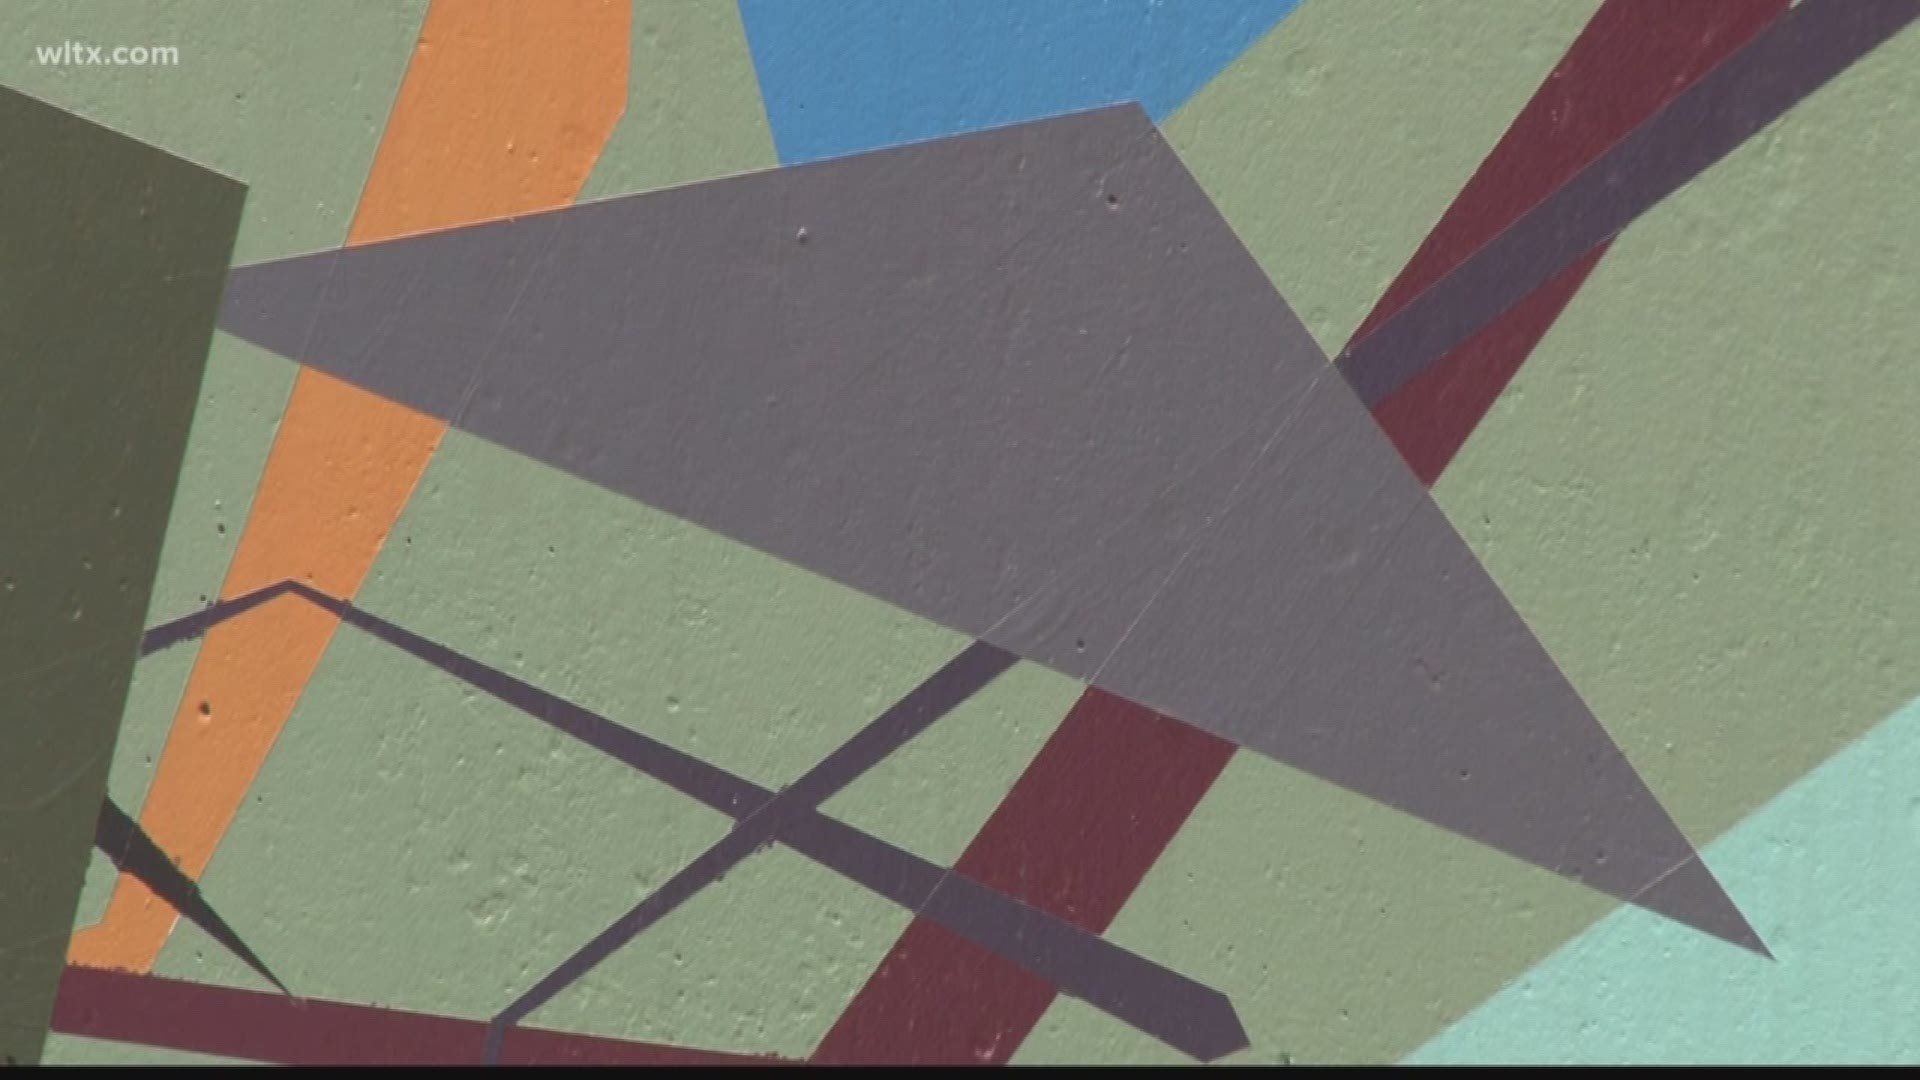 A local artist is hoping his mural will "make you feel good"